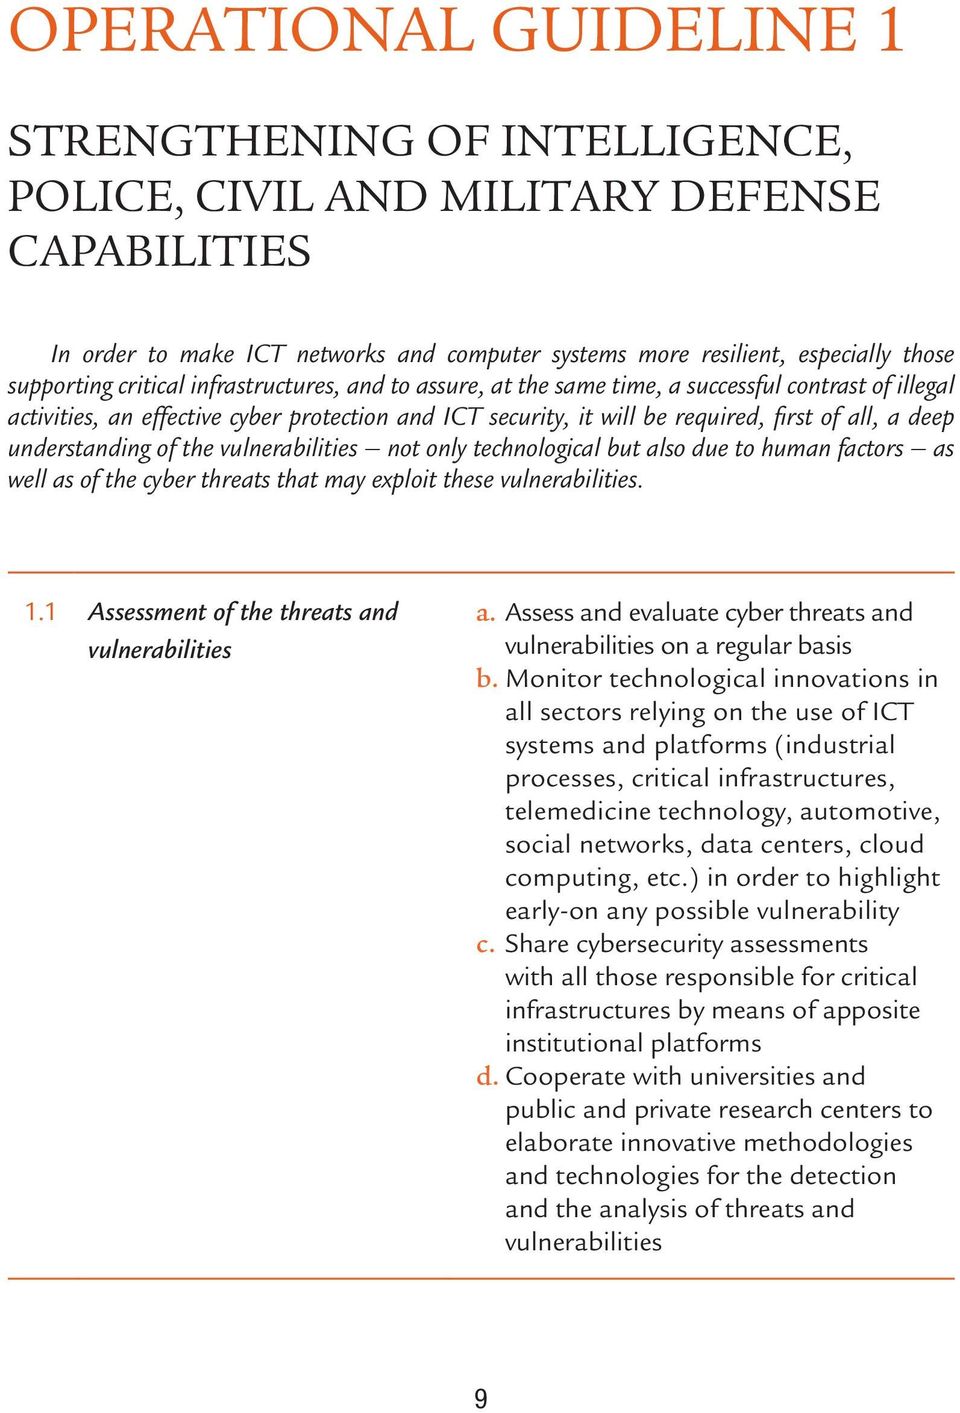 understanding of the vulnerabilities not only technological but also due to human factors as well as of the cyber threats that may exploit these vulnerabilities. 1.